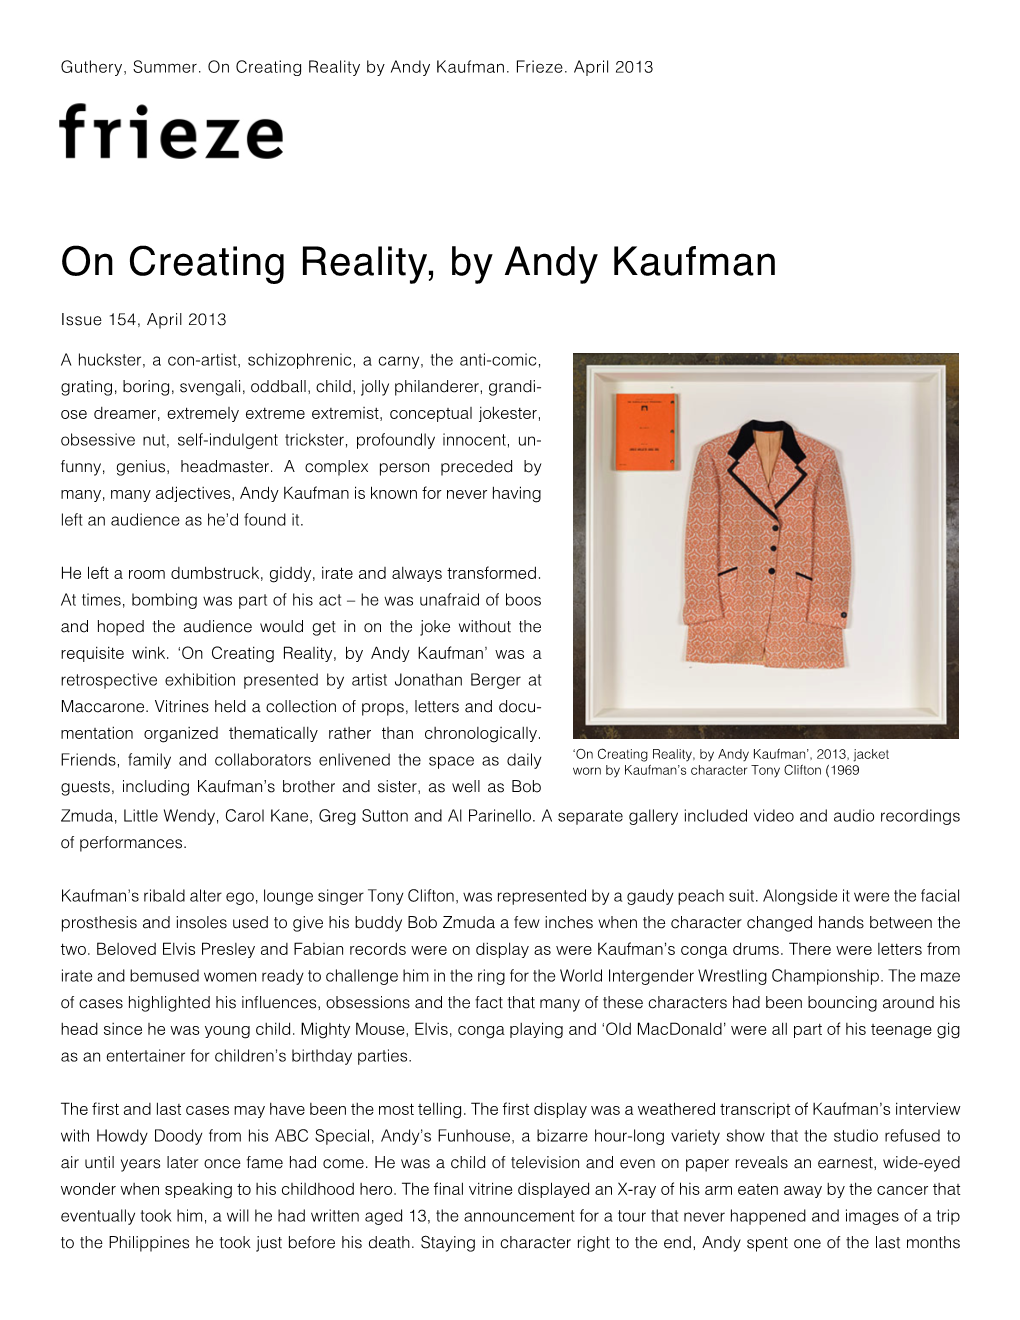 On Creating Reality, by Andy Kaufman